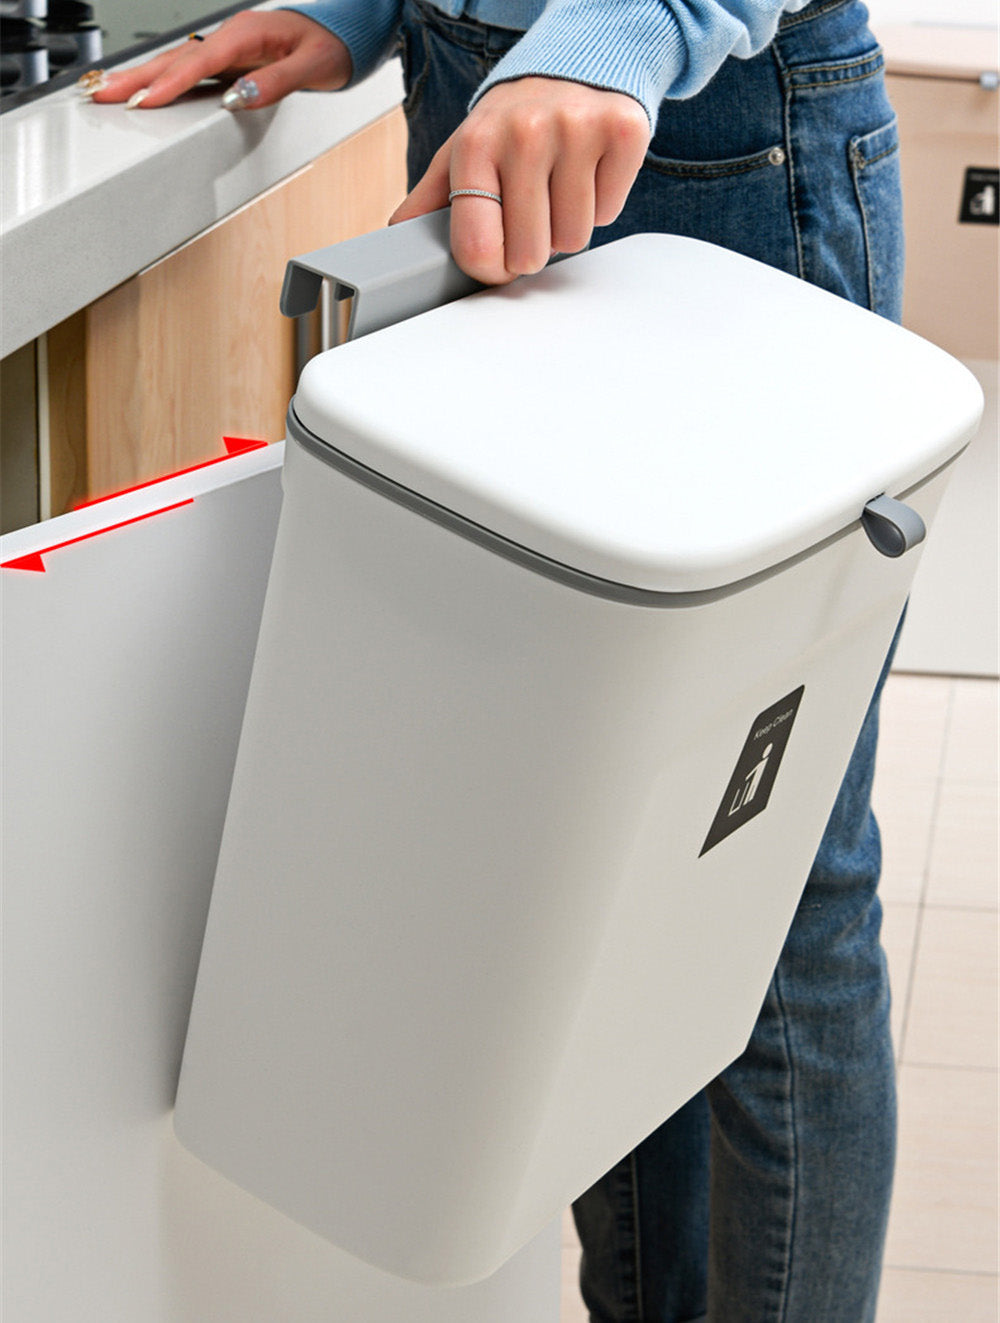 Modern Kitchen Waste Bin Multipurpose Trash Can Recycling Bin With Convenient Cabinet Door Hanging Bracket Or Self Adhesive Wall Mounting